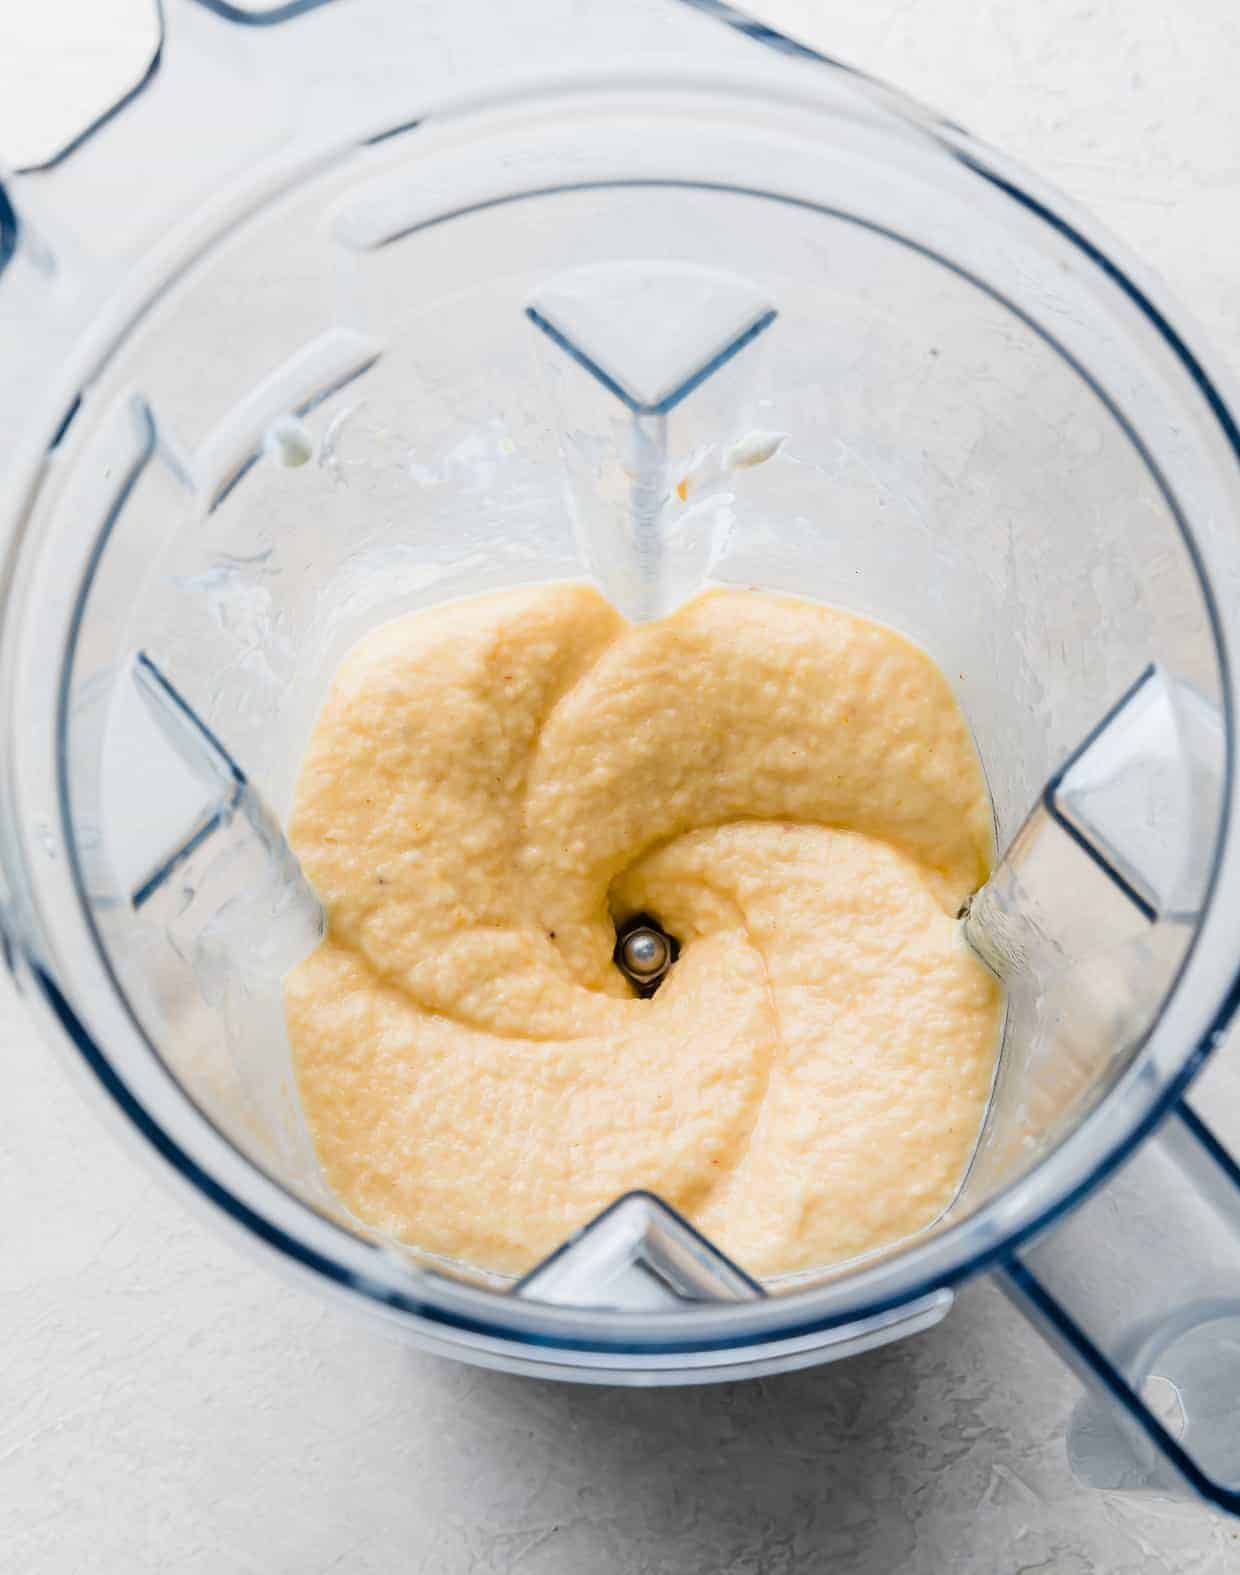 A banana peach smoothie mixture pureed in a blender.